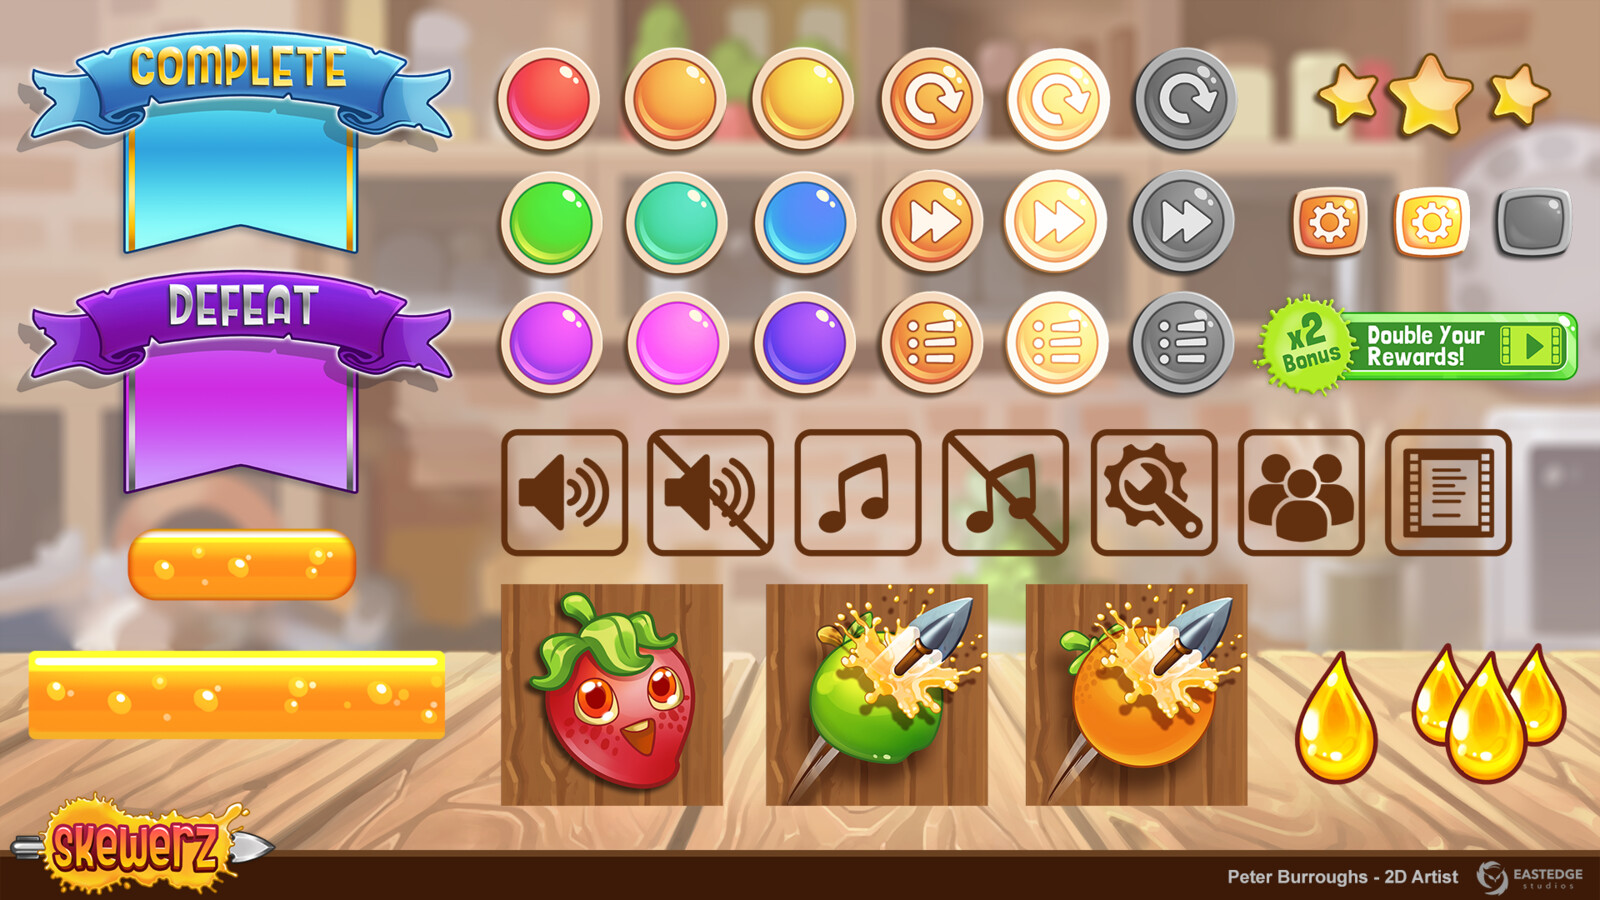 Several buttons and icons used throughout the various menus